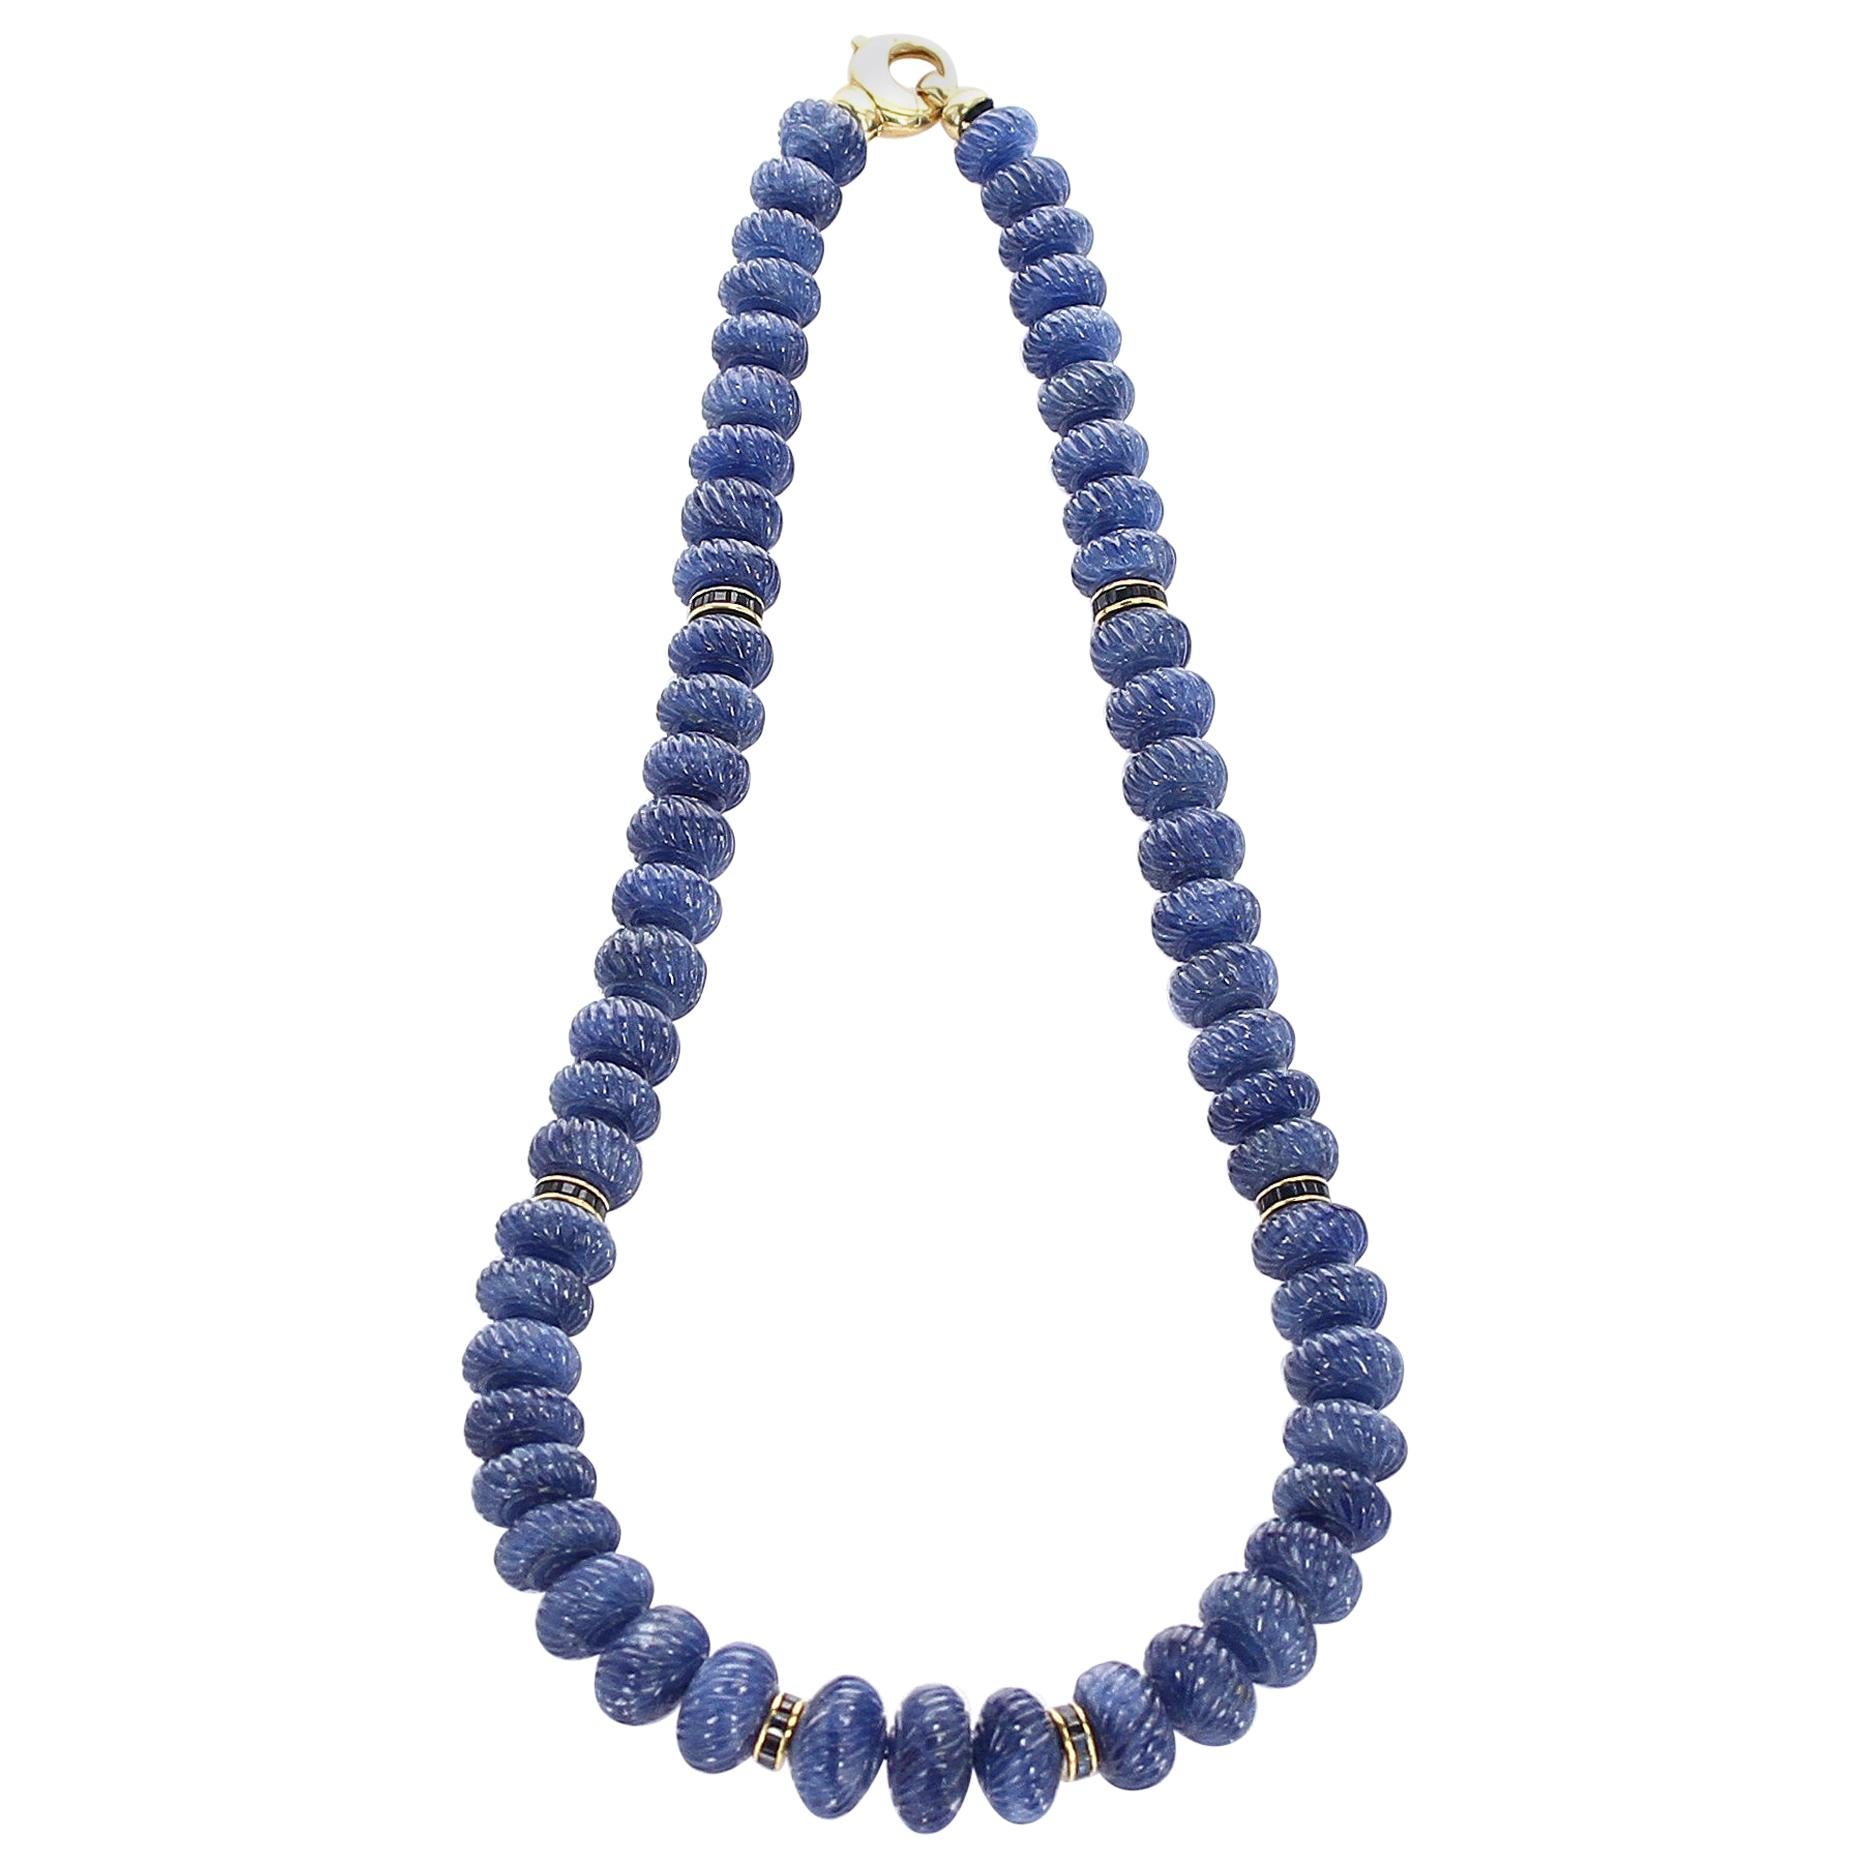 682.50 CTS EARTH MINED PEAR CARVED 20 INCHES LONG BLUE SAPPHIRE BEADS NECKLACE 